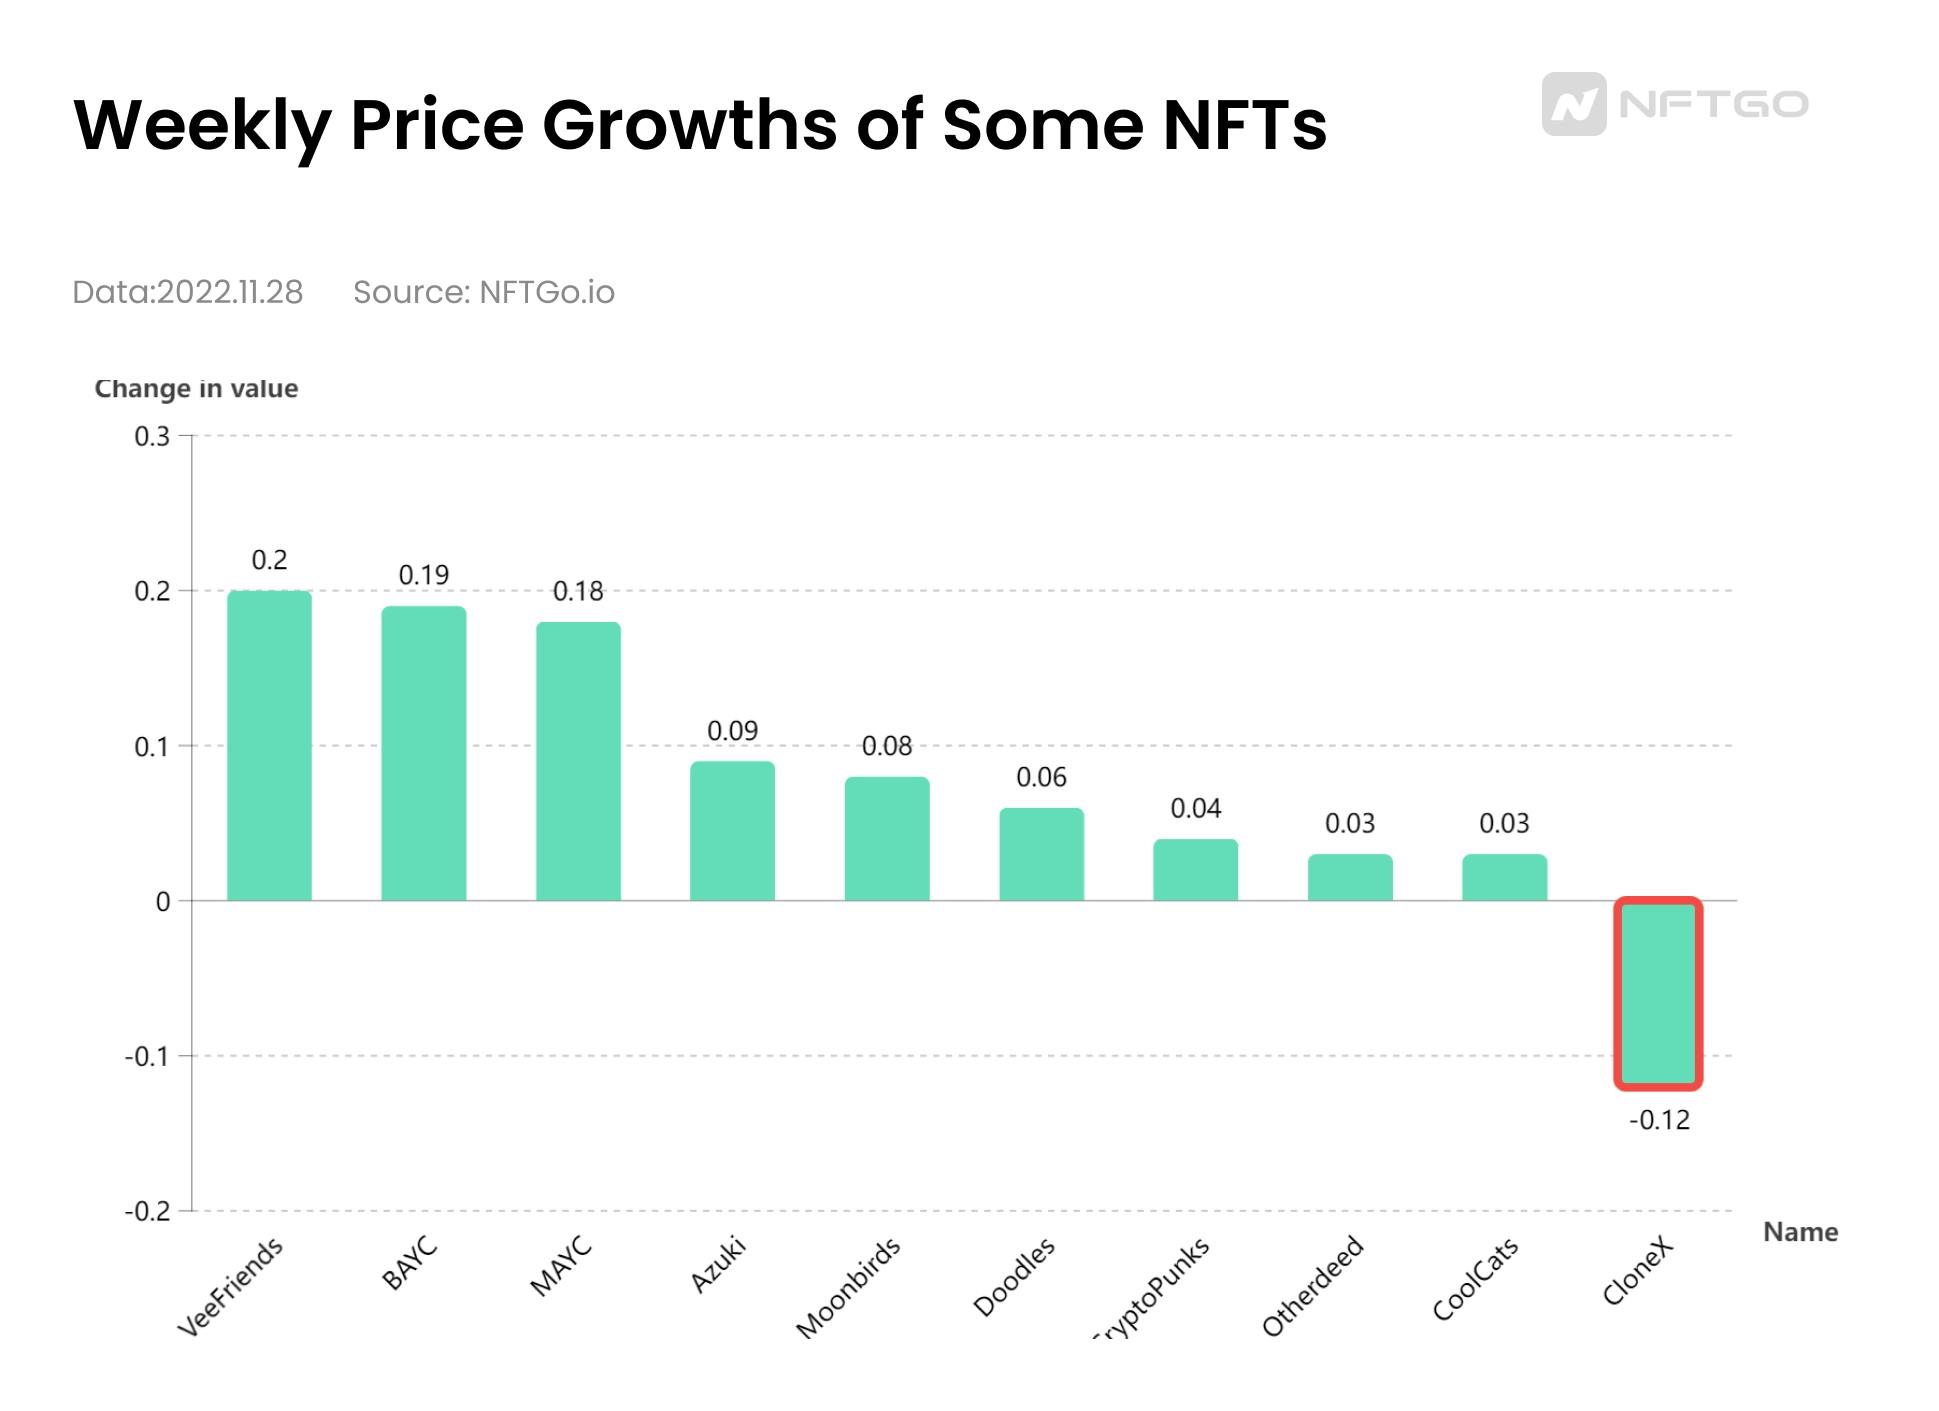 Weekly Price Growths of Some NFTs (Source: NFTGo.io)